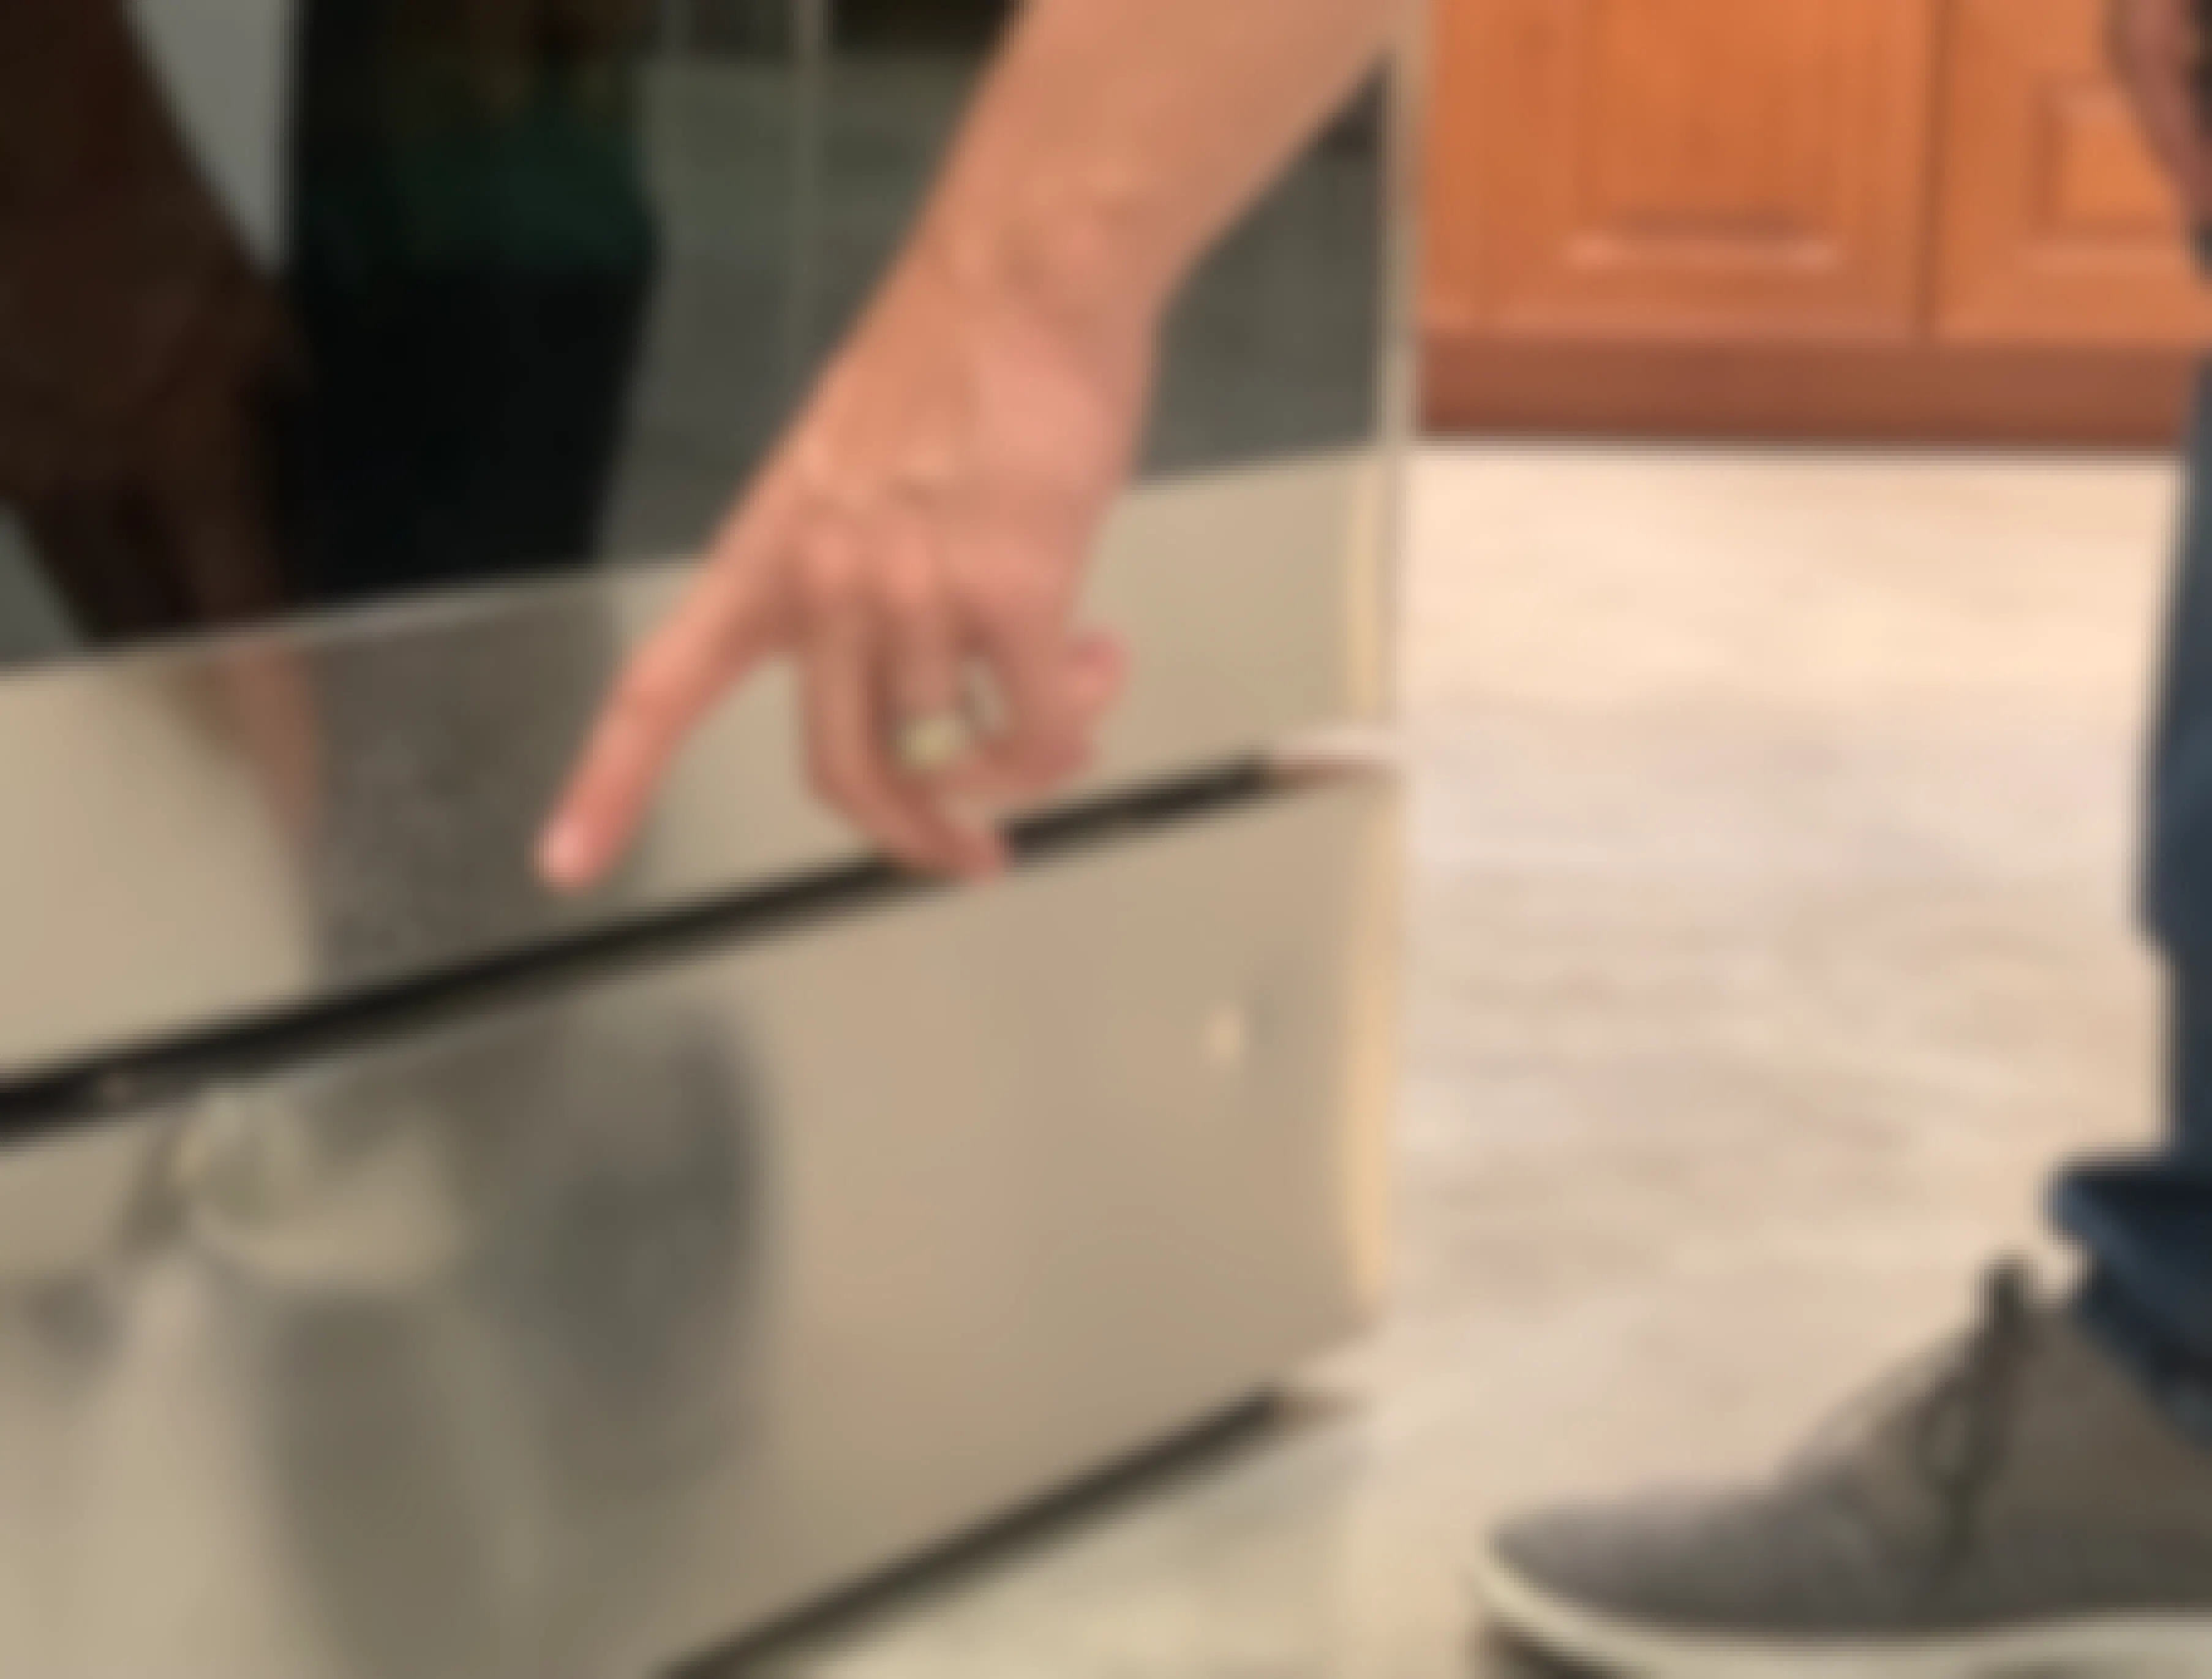 Man's hand pointing at dent on damaged appliance